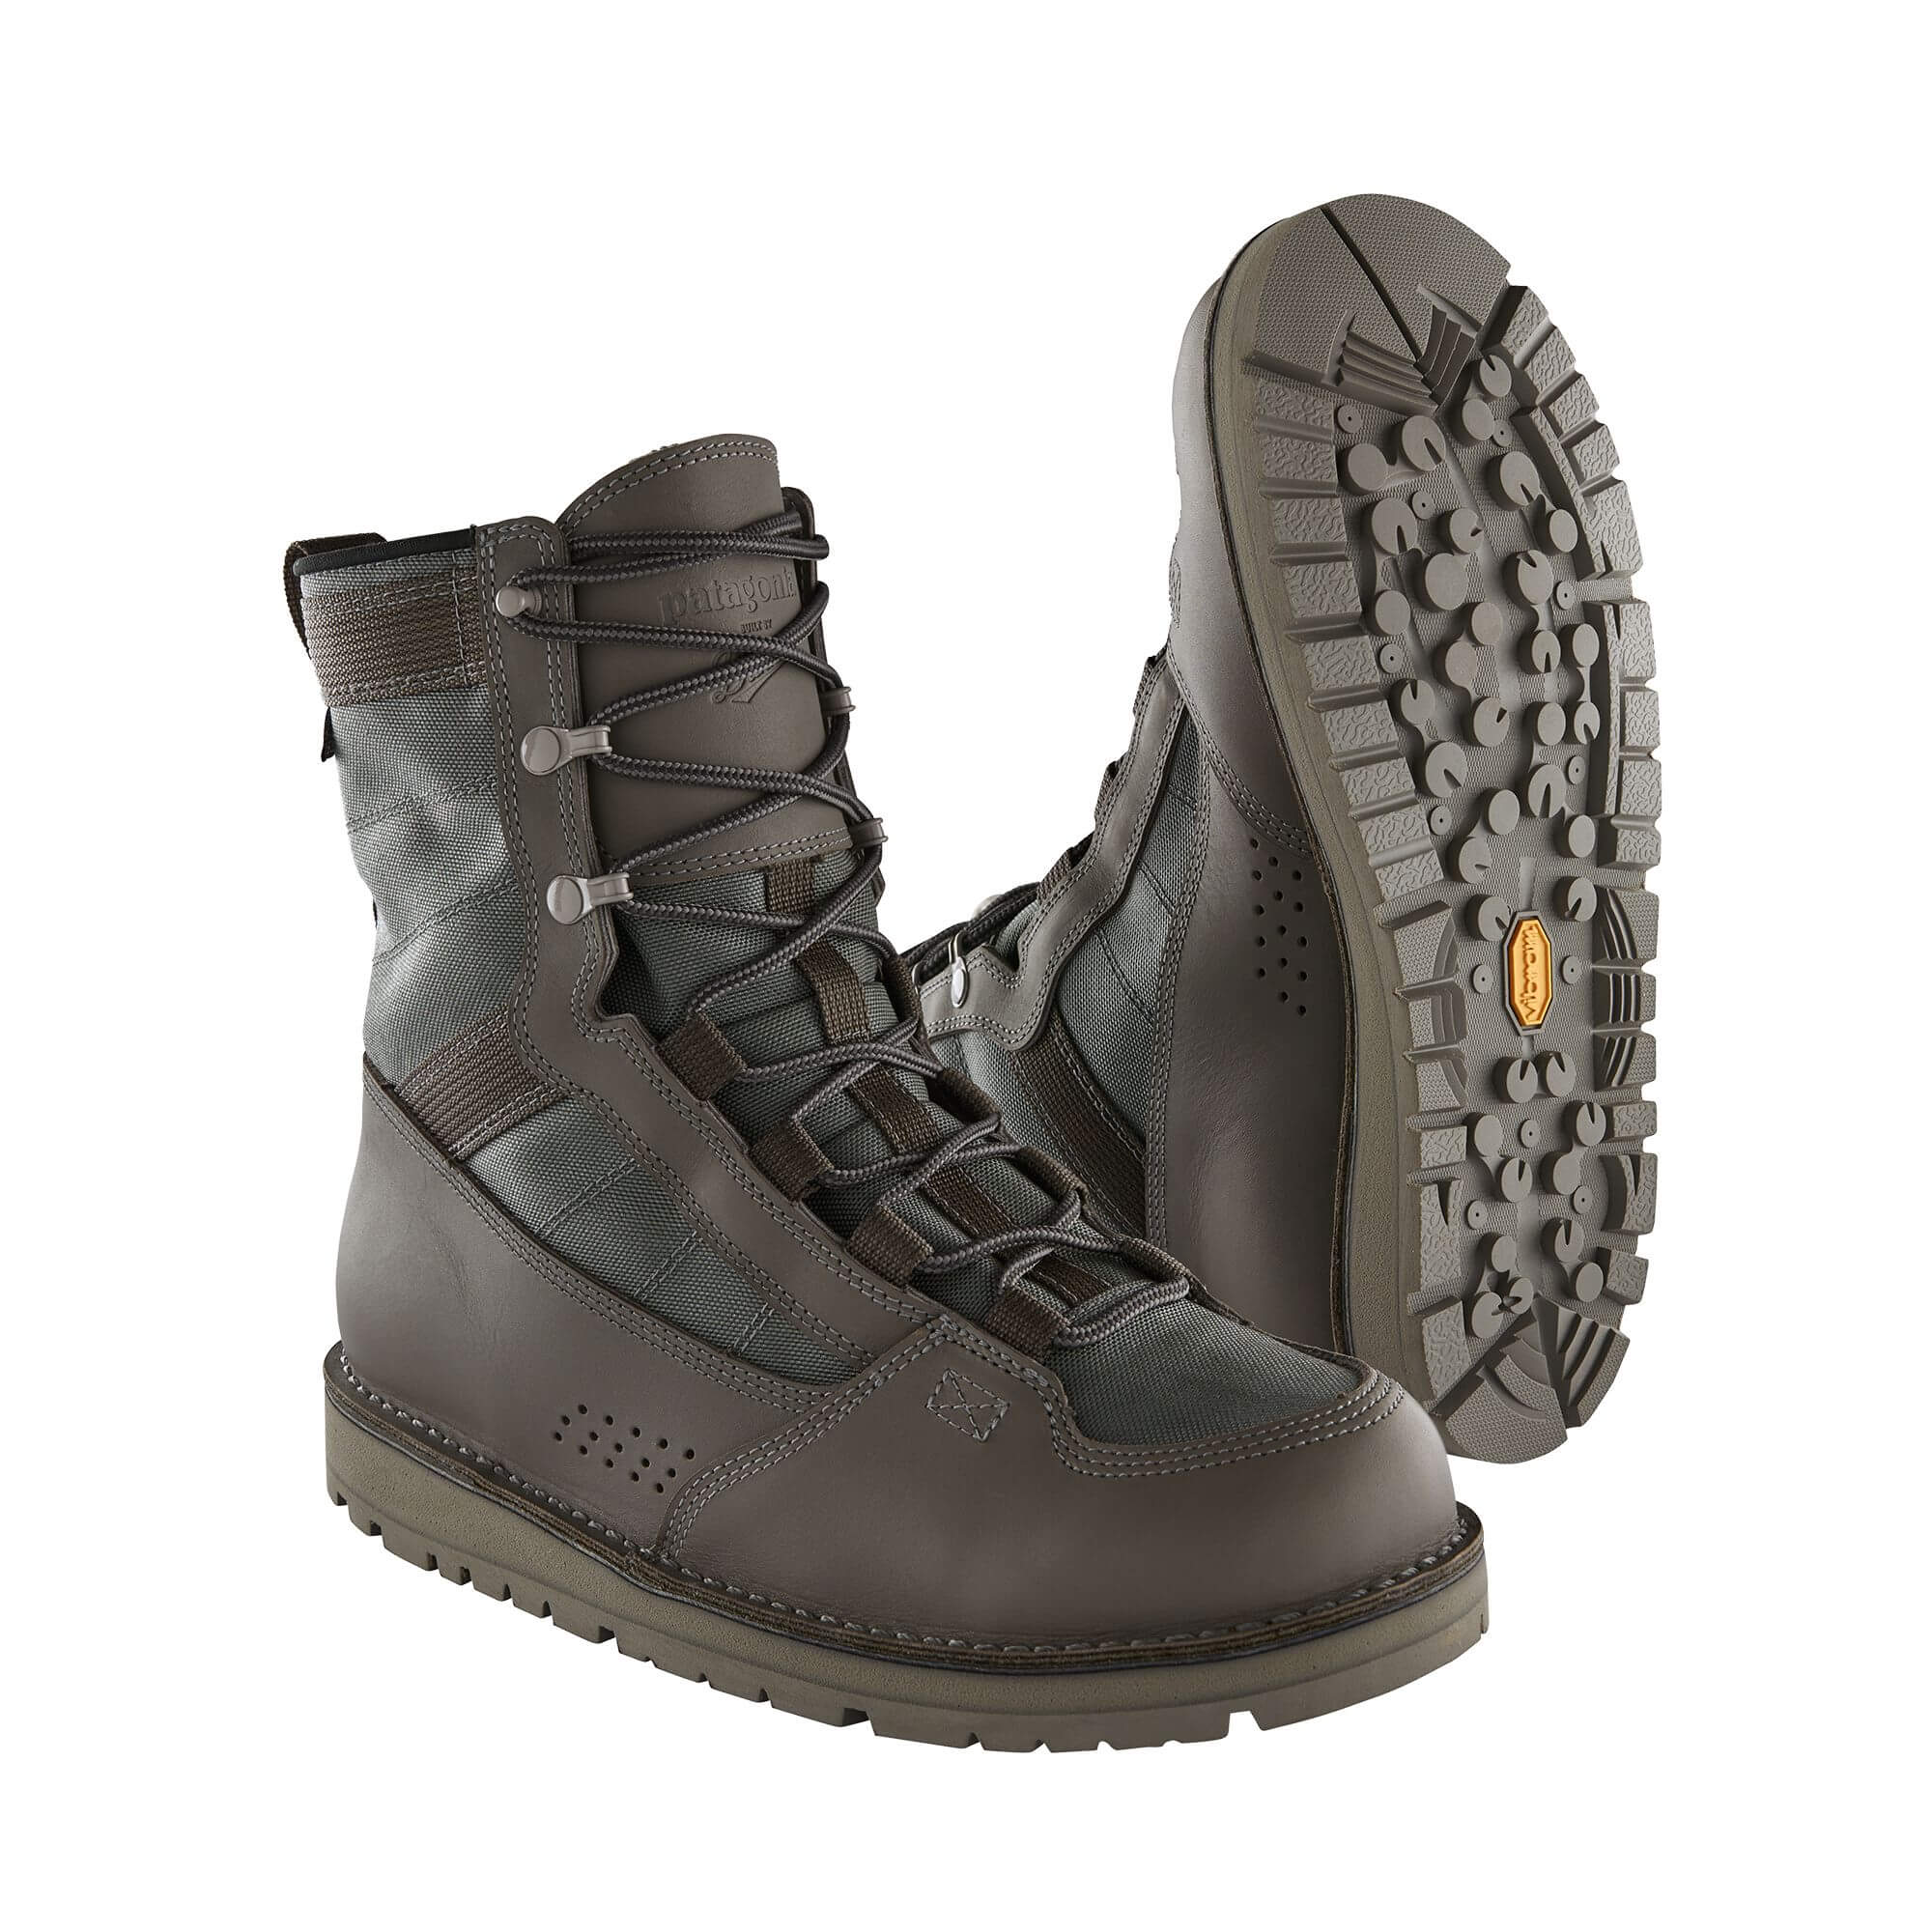 Patagonia River Salt Wading Boot (by Danner) - 12